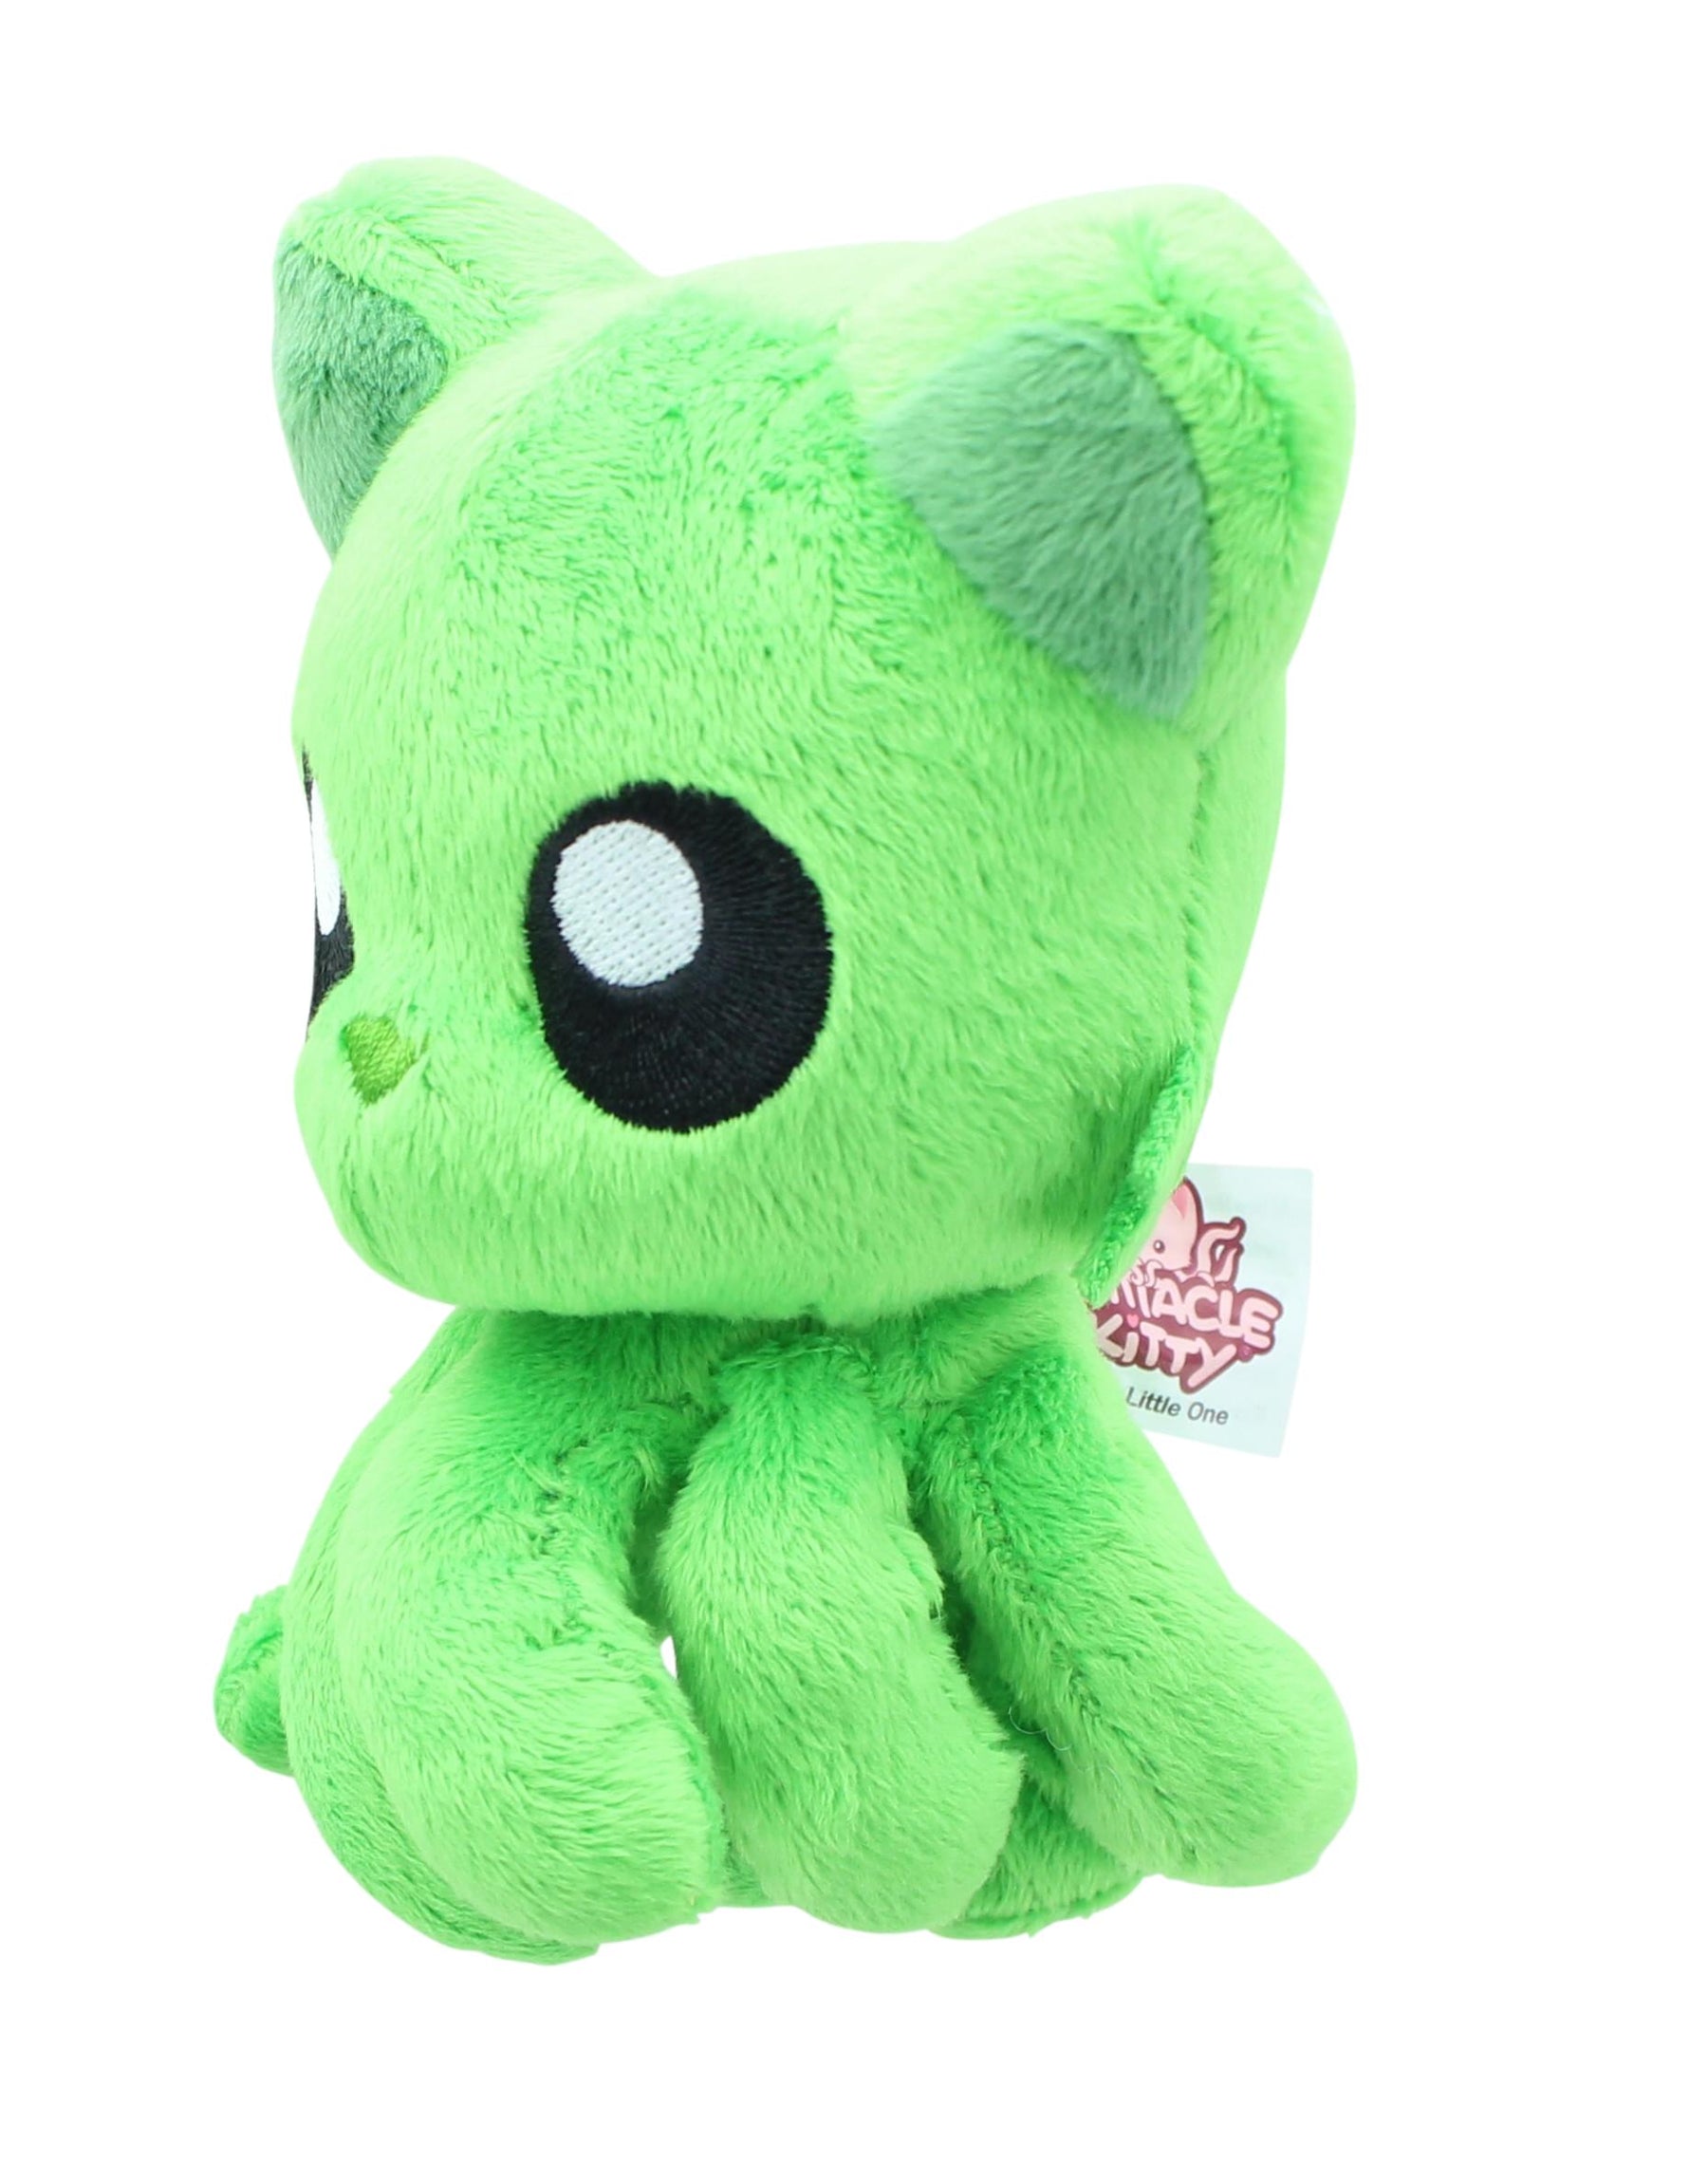 Tentacle Kitty Little Ones 4 Inch Plush | Green